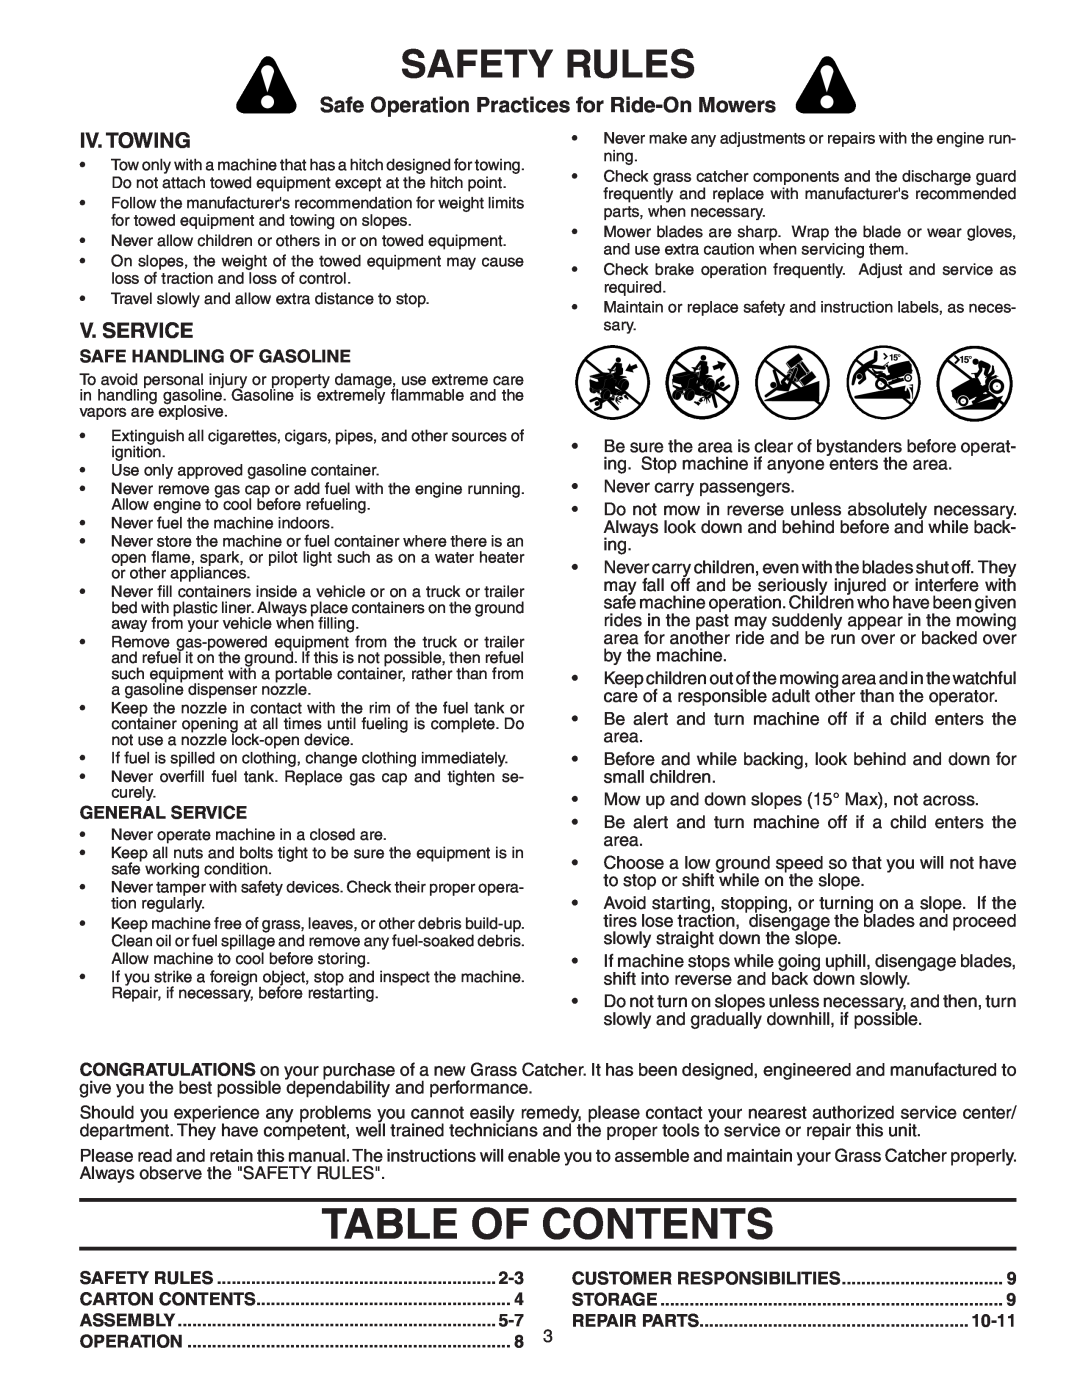 Husqvarna GTT348 Table Of Contents, Iv. Towing, V. Service, Safety Rules, Safe Operation Practices for Ride-On Mowers 